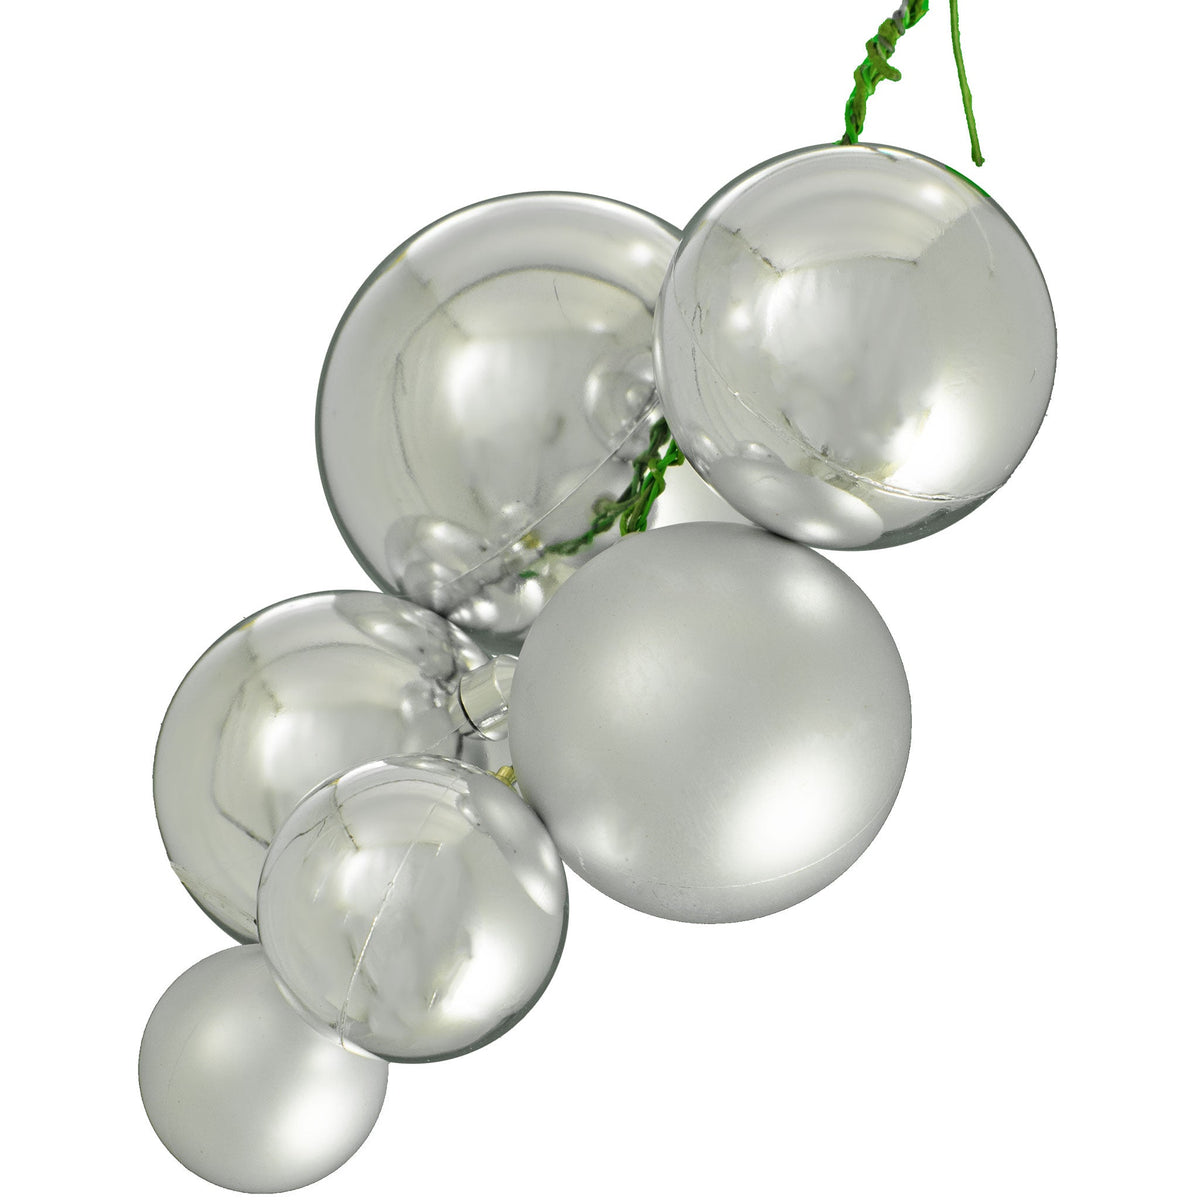 Lee Display's Shiny Silver and Matte Silver Christmas Ball Ornaments are perfect for decorating your christmas trees and garlands